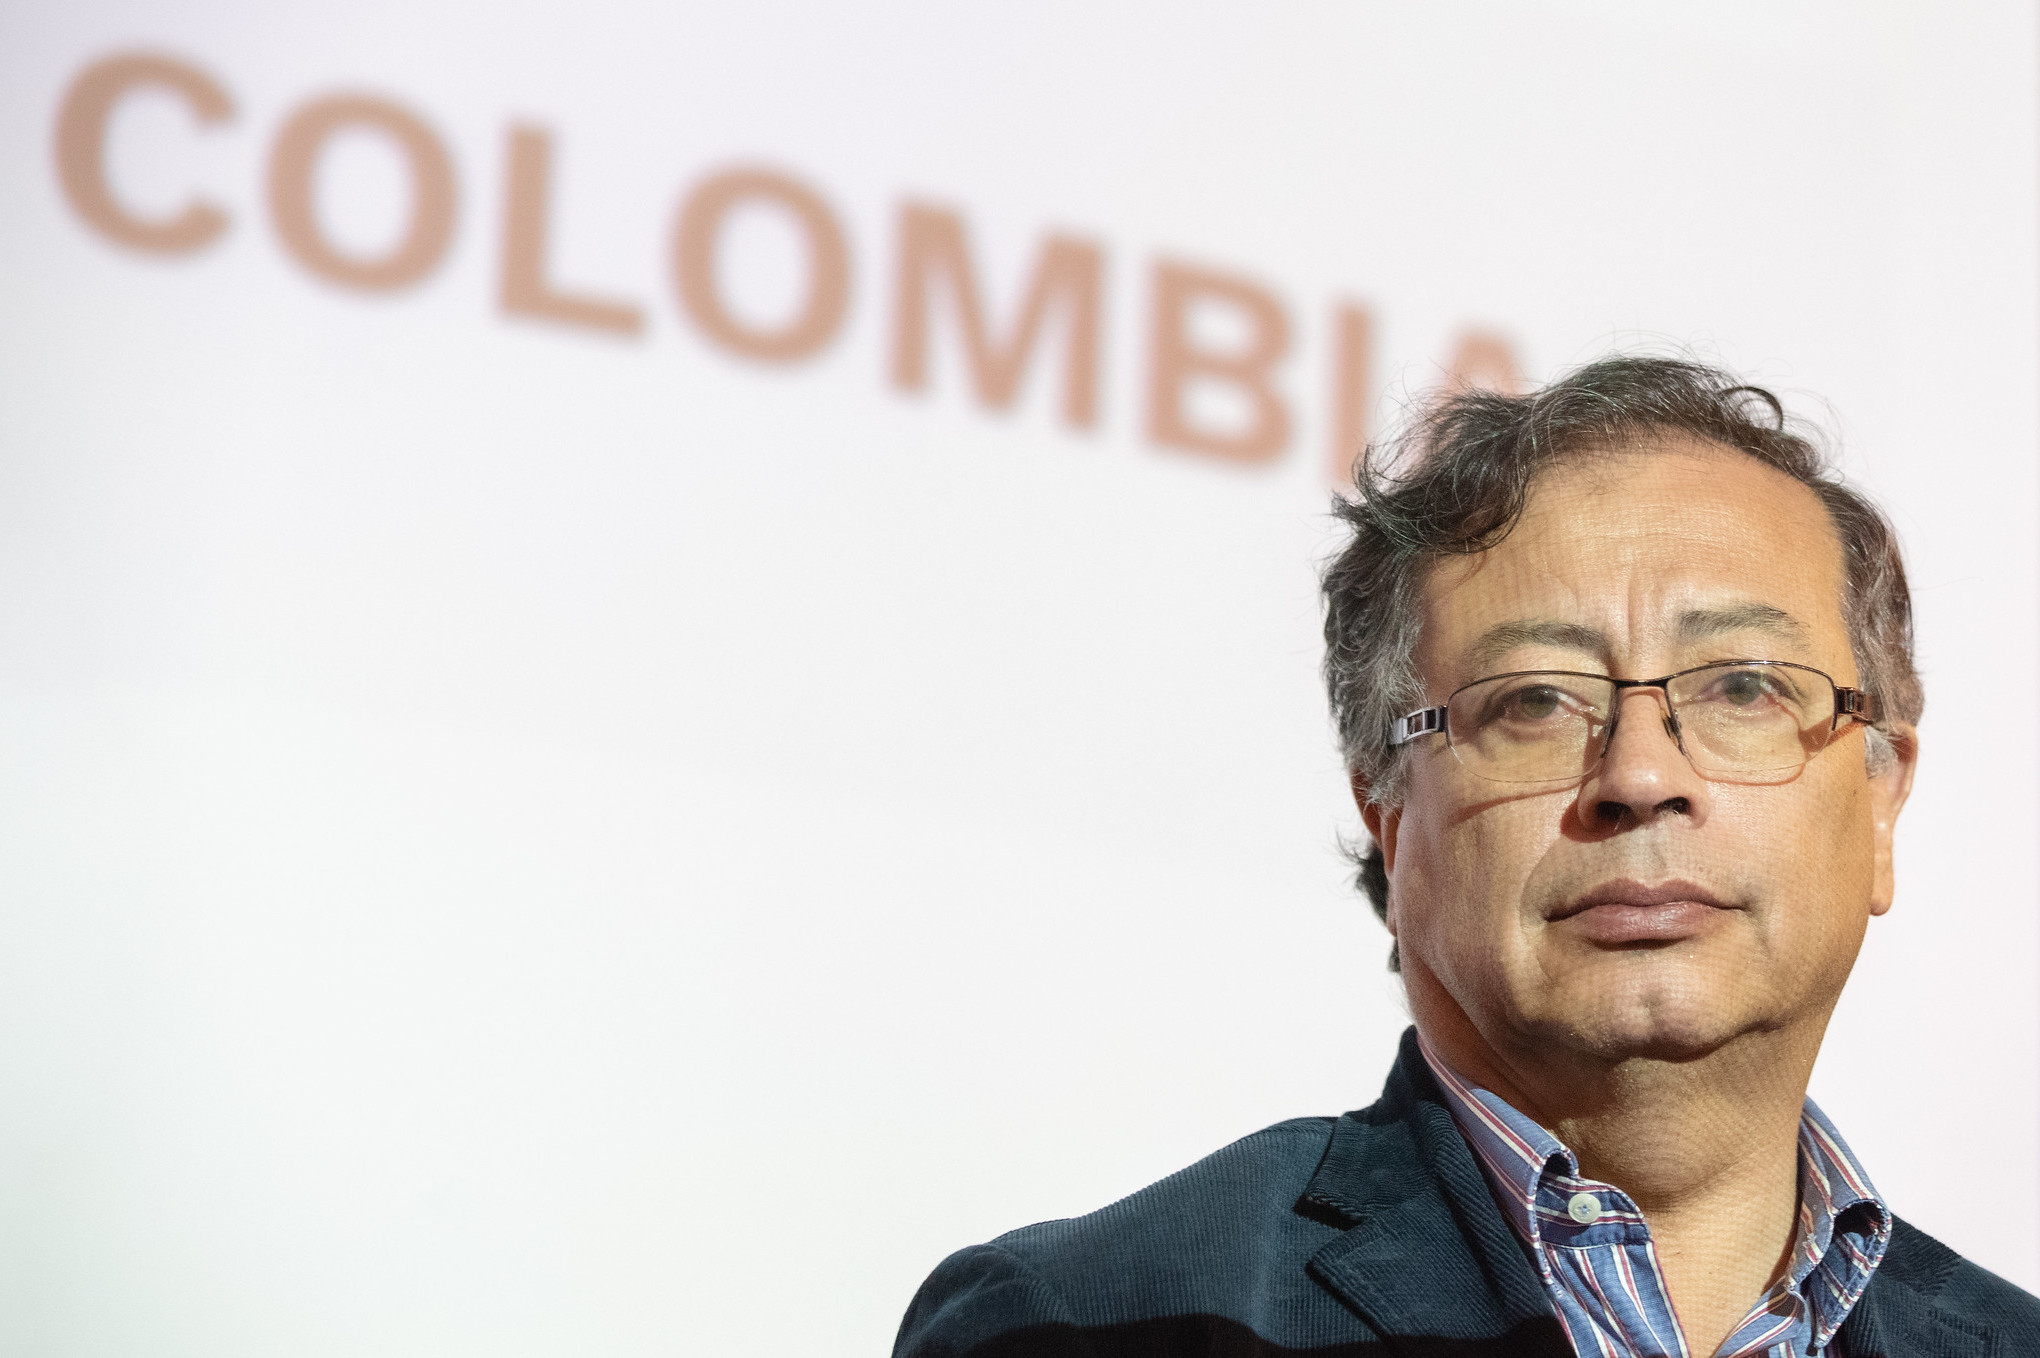 Gustavo Petro in front of the word "Colombia", wearing glasses and a button-up shirt and blazer.